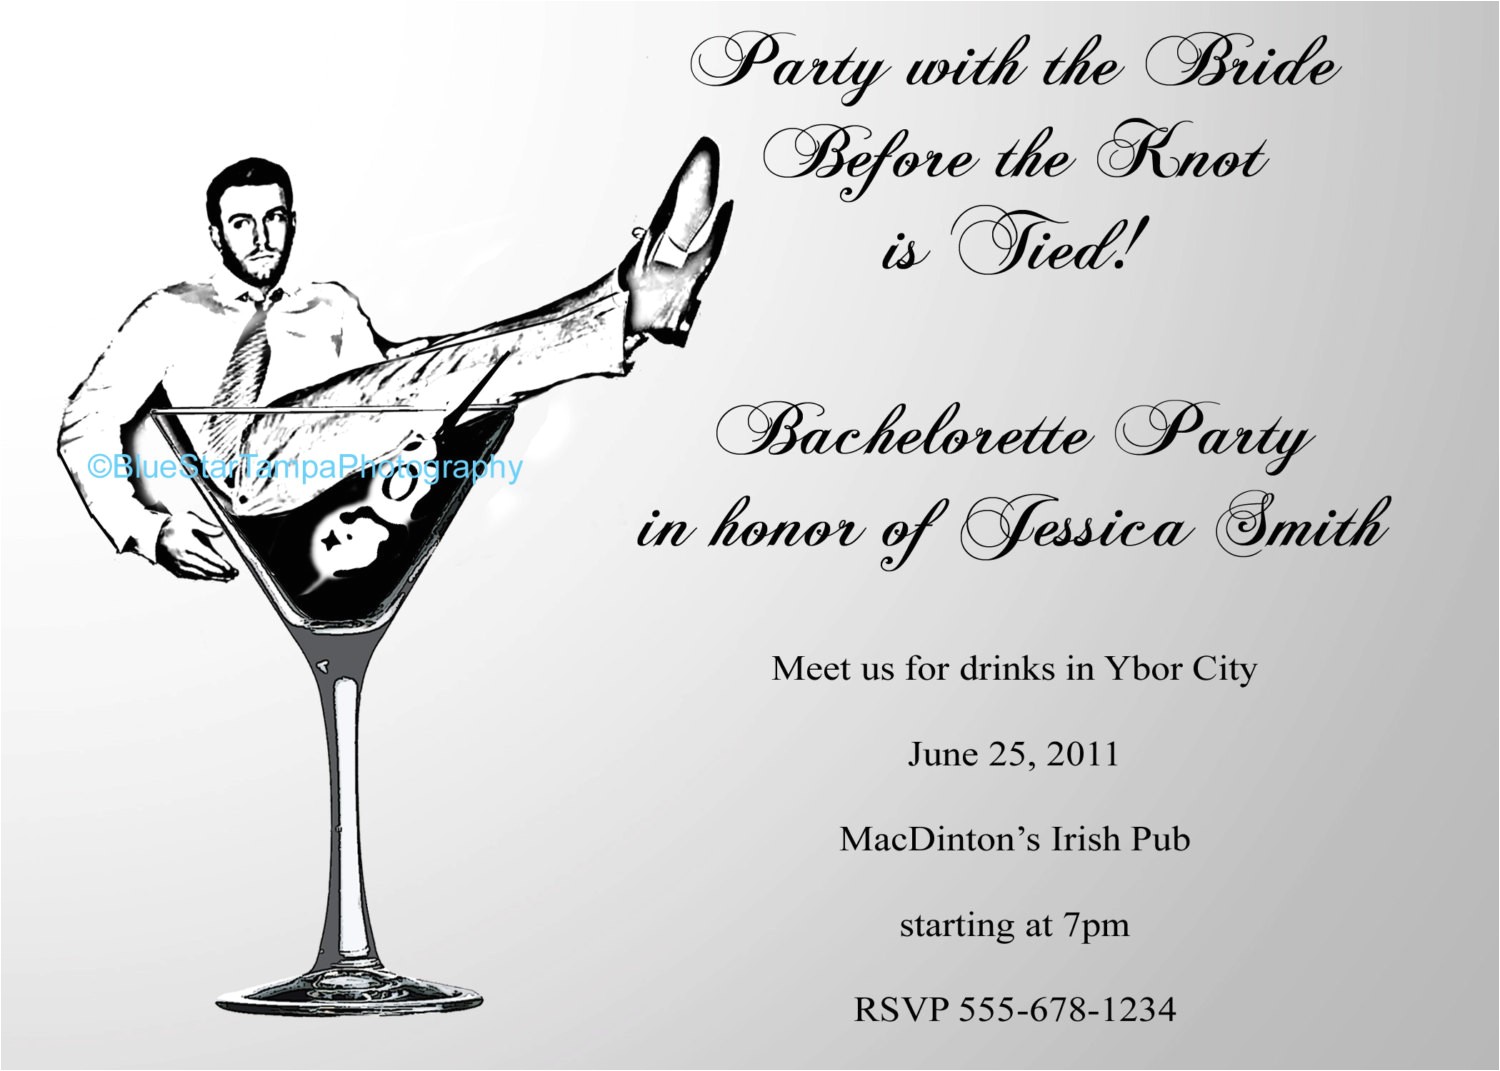 Bachelor Party Invites Funny Funny Bachelor Party Invitations Cimvitation